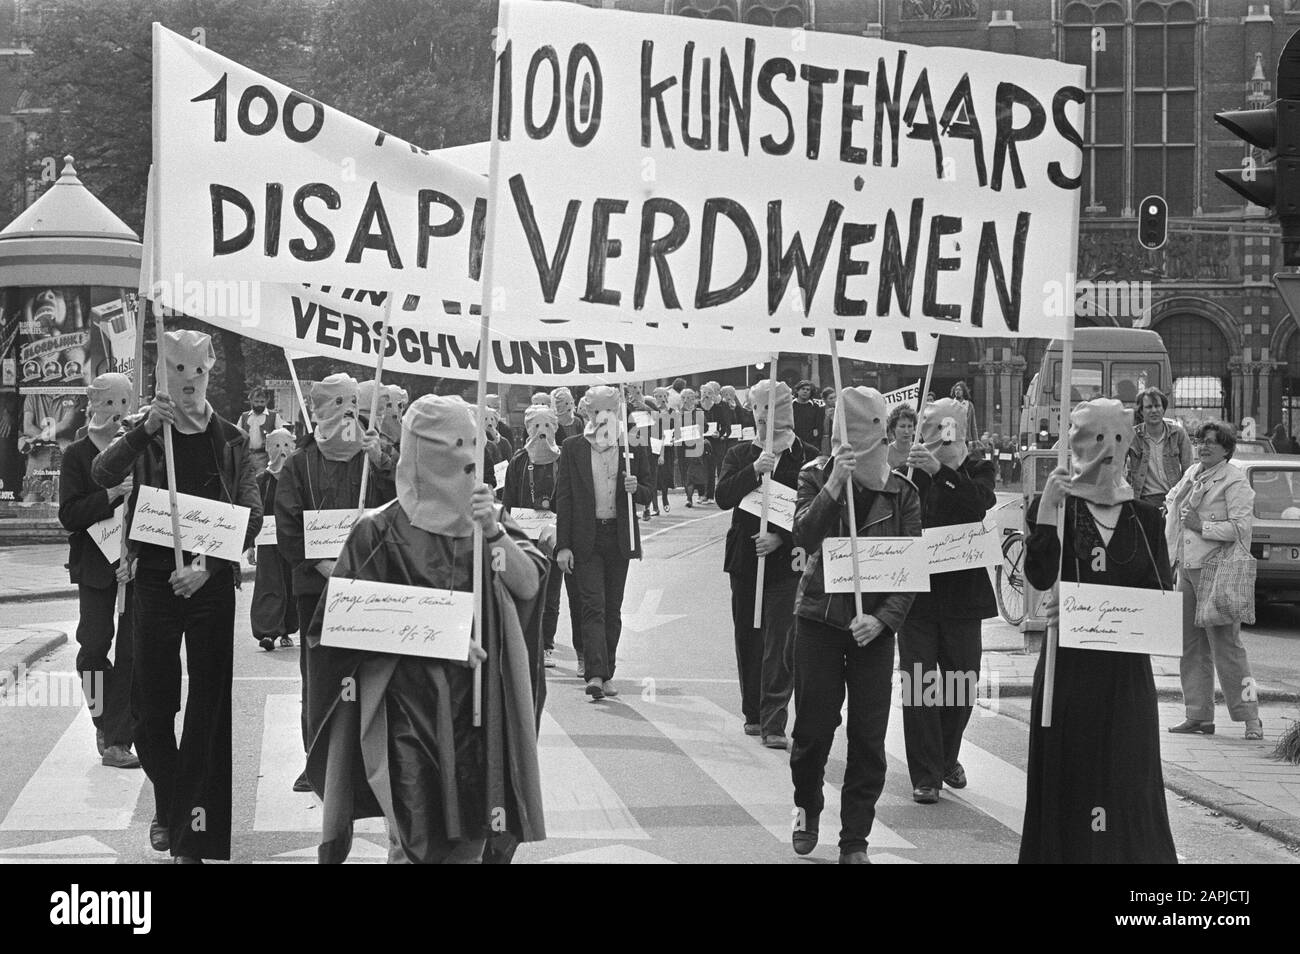 Demonstration in Amsterdam for a hundred missing artists Description: Protesters in Amsterdam, with hoods on, carrying banners and signs with the names of 100 missing artists Date: 12 September 1981 Location: Amsterdam, Noord-Holland Keywords: artists, demonstrations, signs, banners Stock Photo